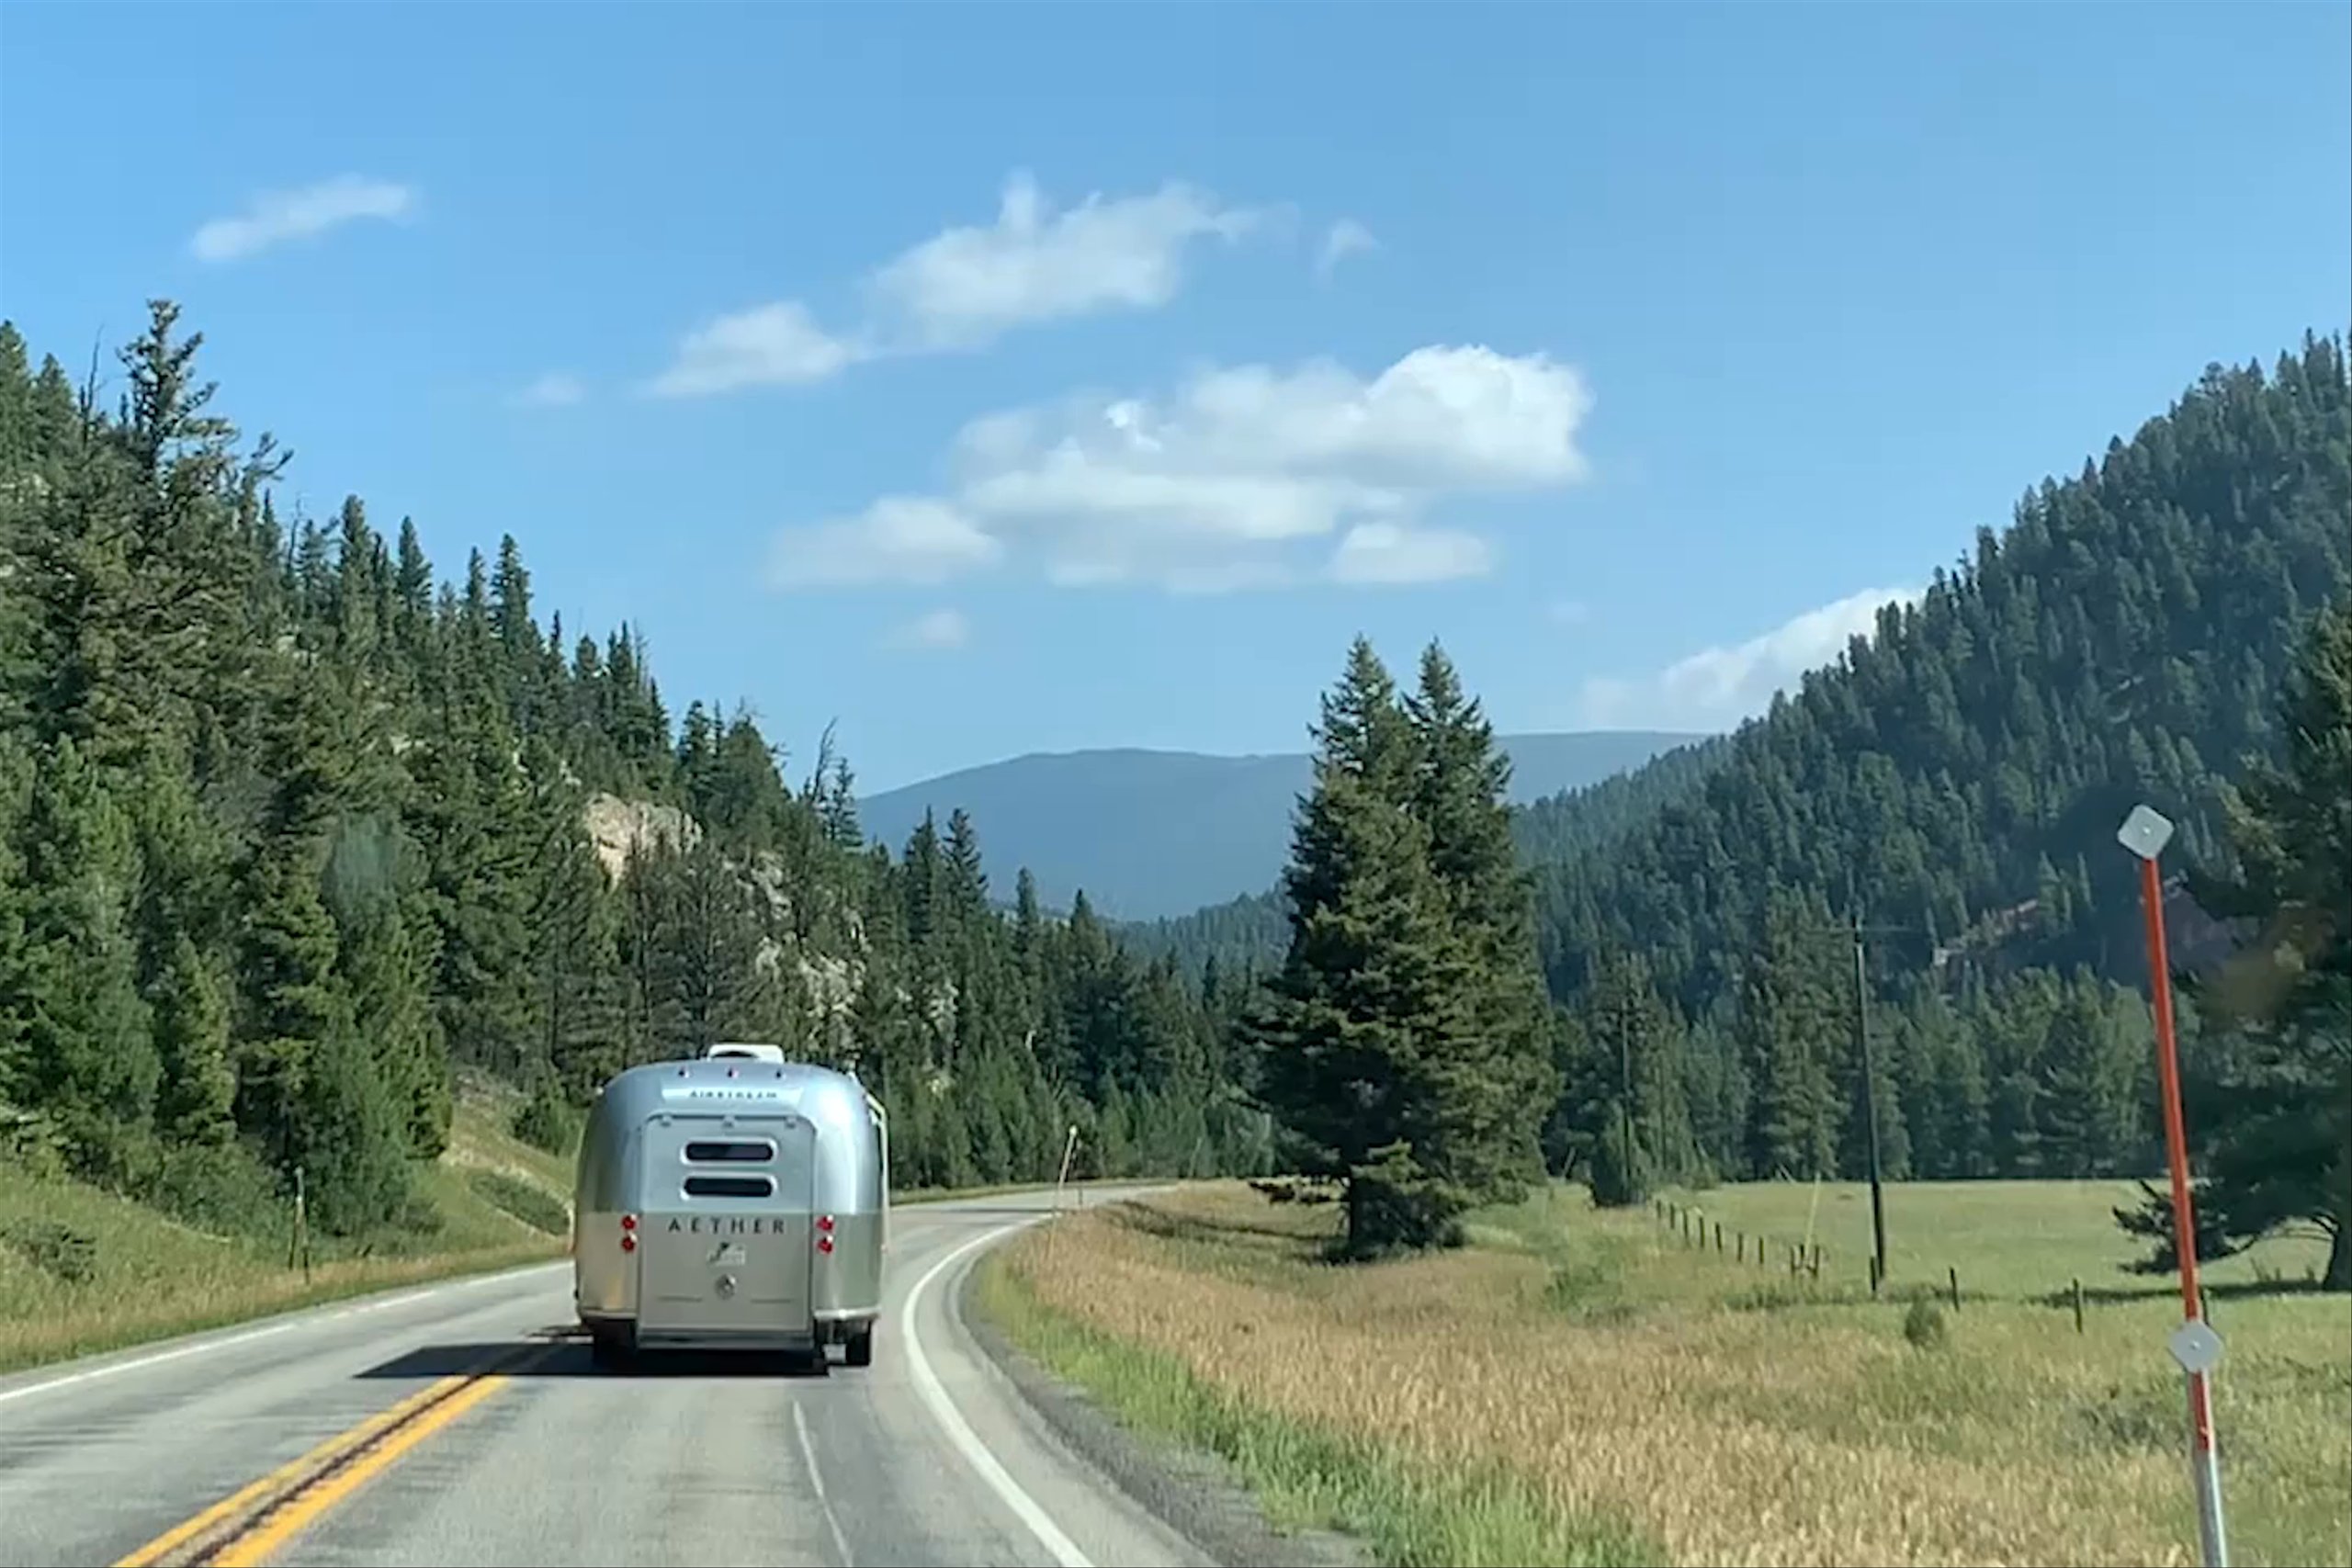 Video of AETHERstream driving in Jackson, Wyoming with forests and mountains in the background